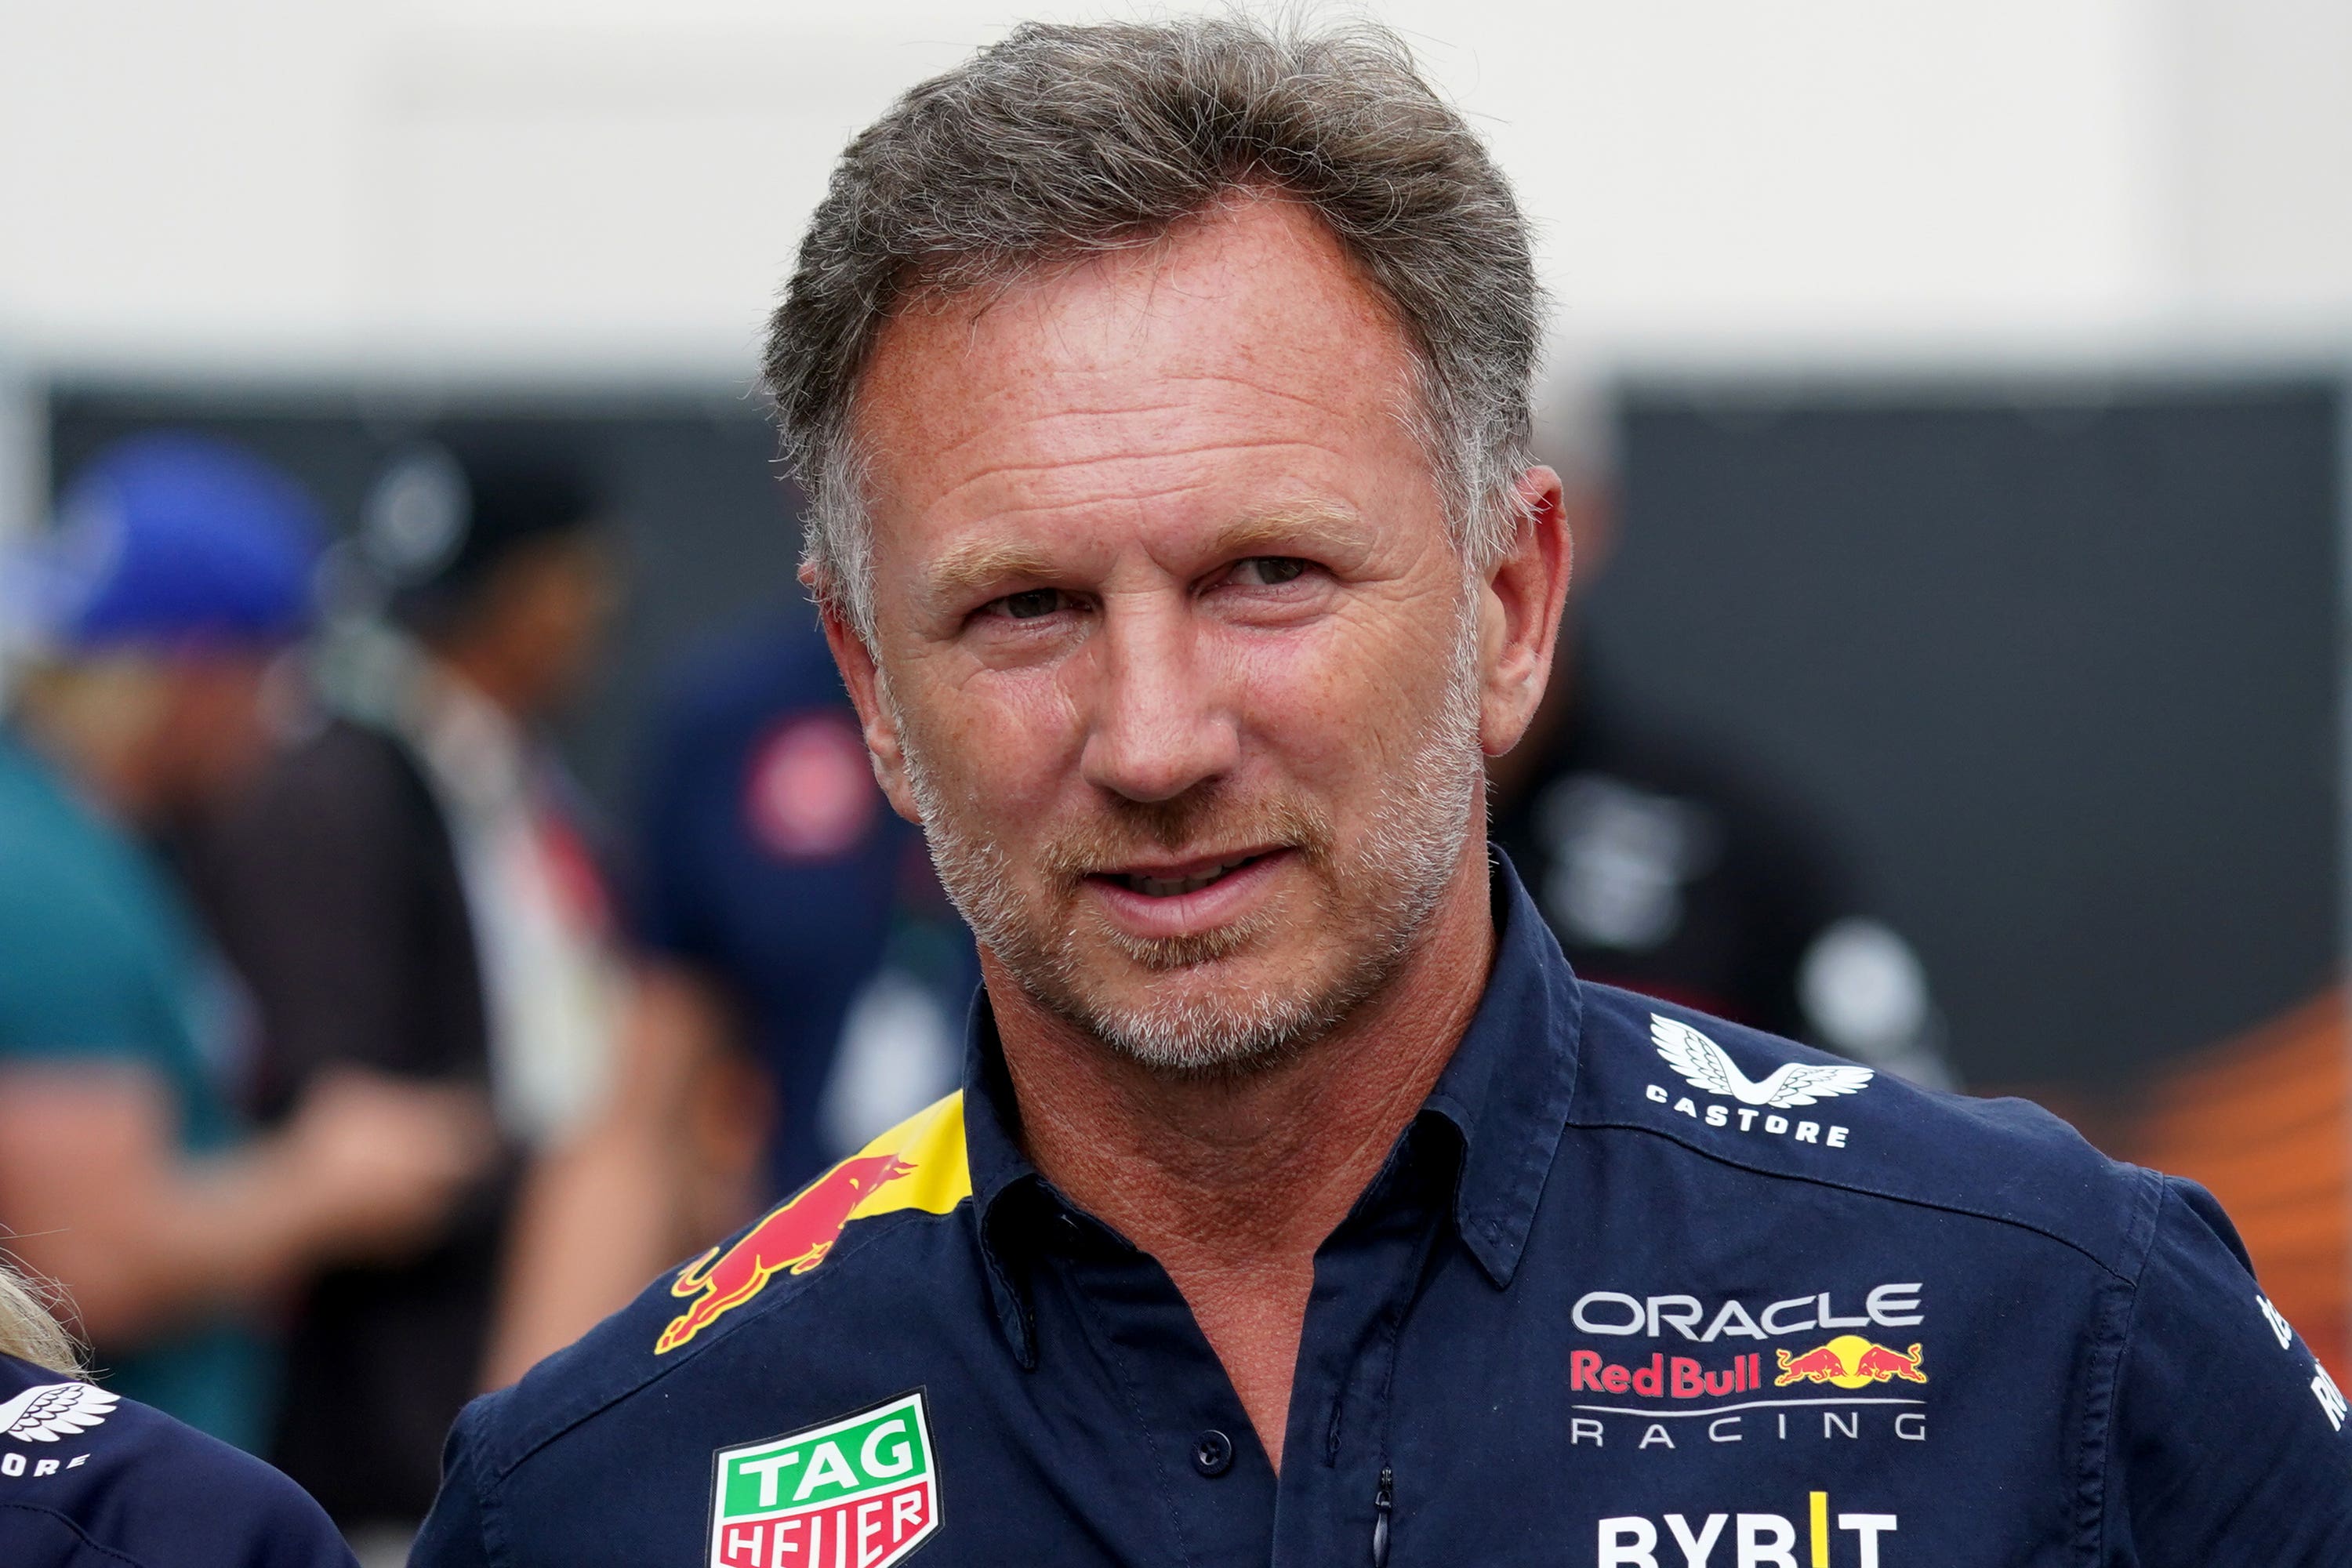 Christian Horner insists the support from Red Bull has been ‘overwhelming’ despite the current investigation into his conduct